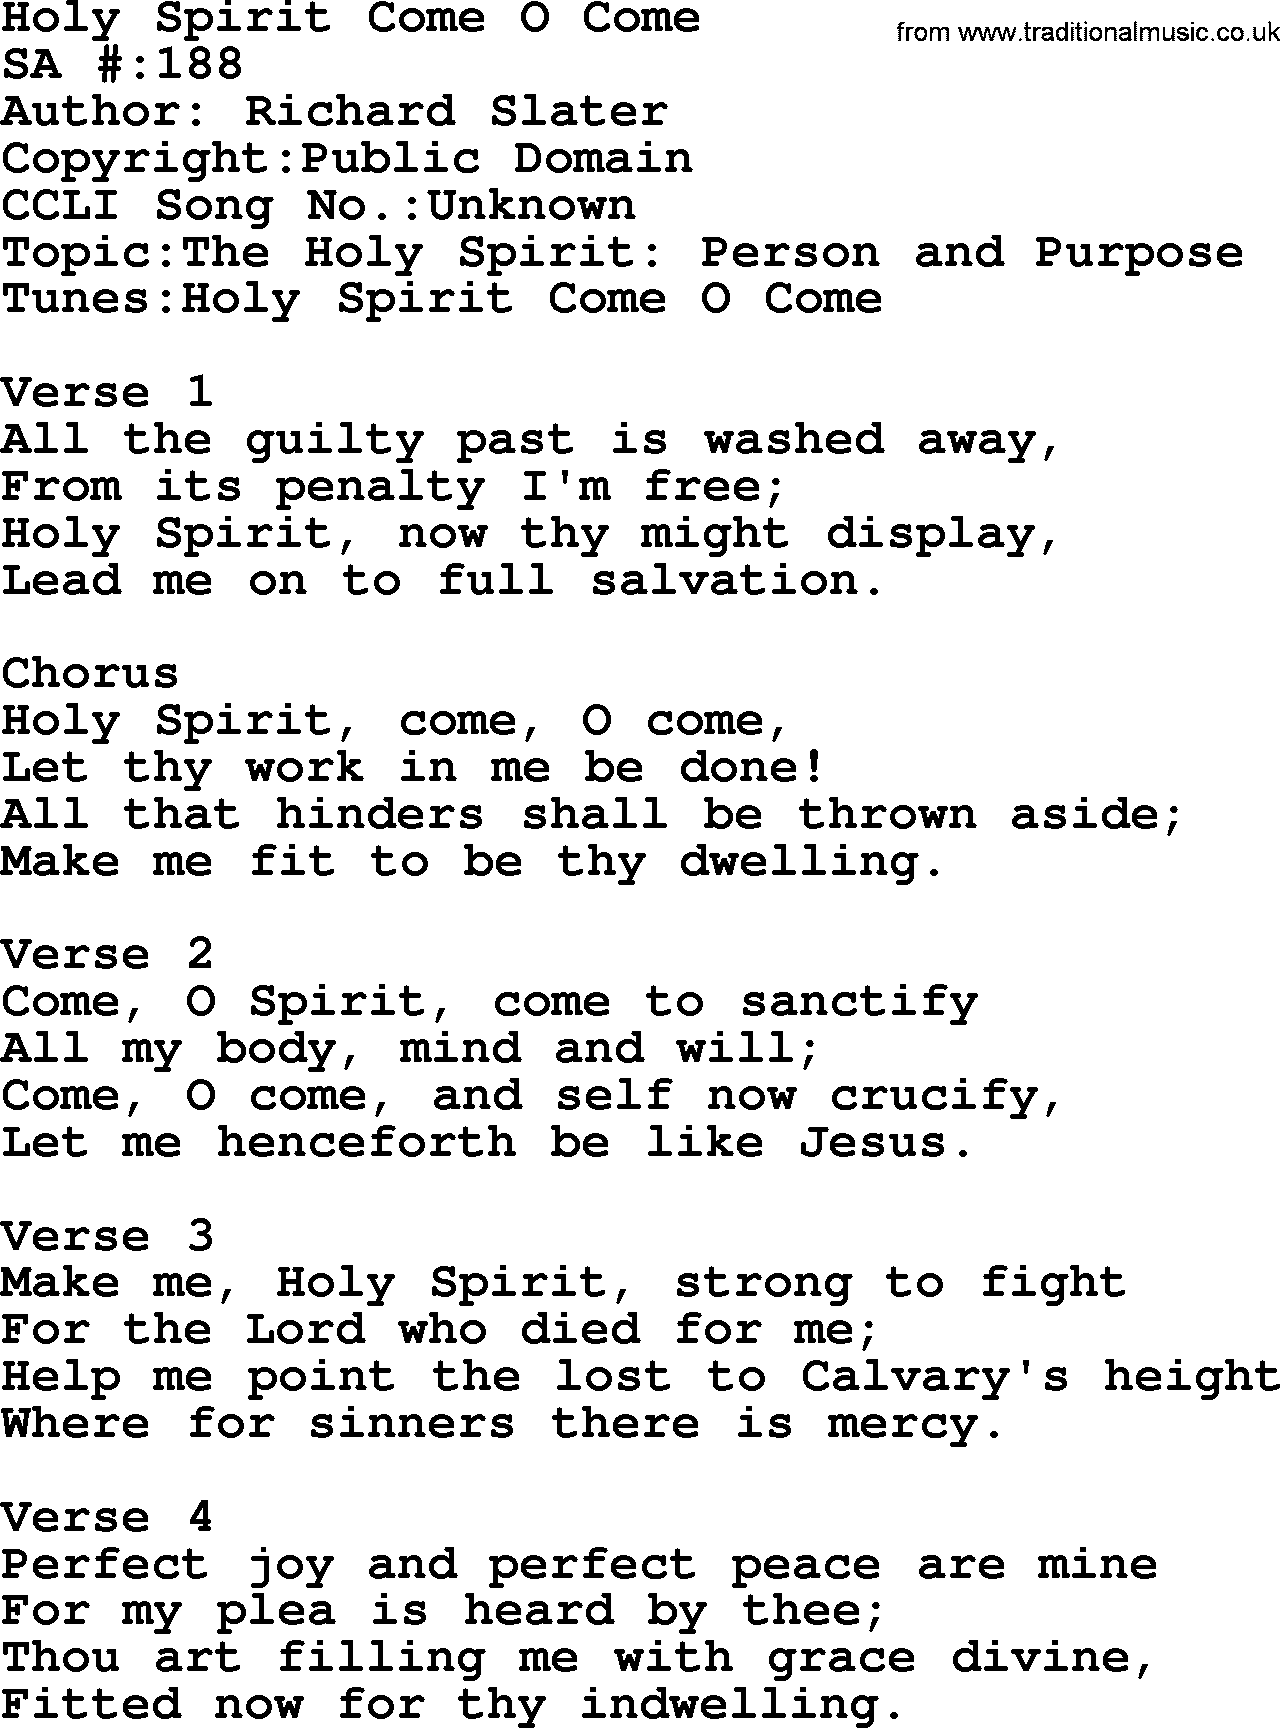 Salvation Army Hymnal, title: Holy Spirit Come O Come, with lyrics and PDF,